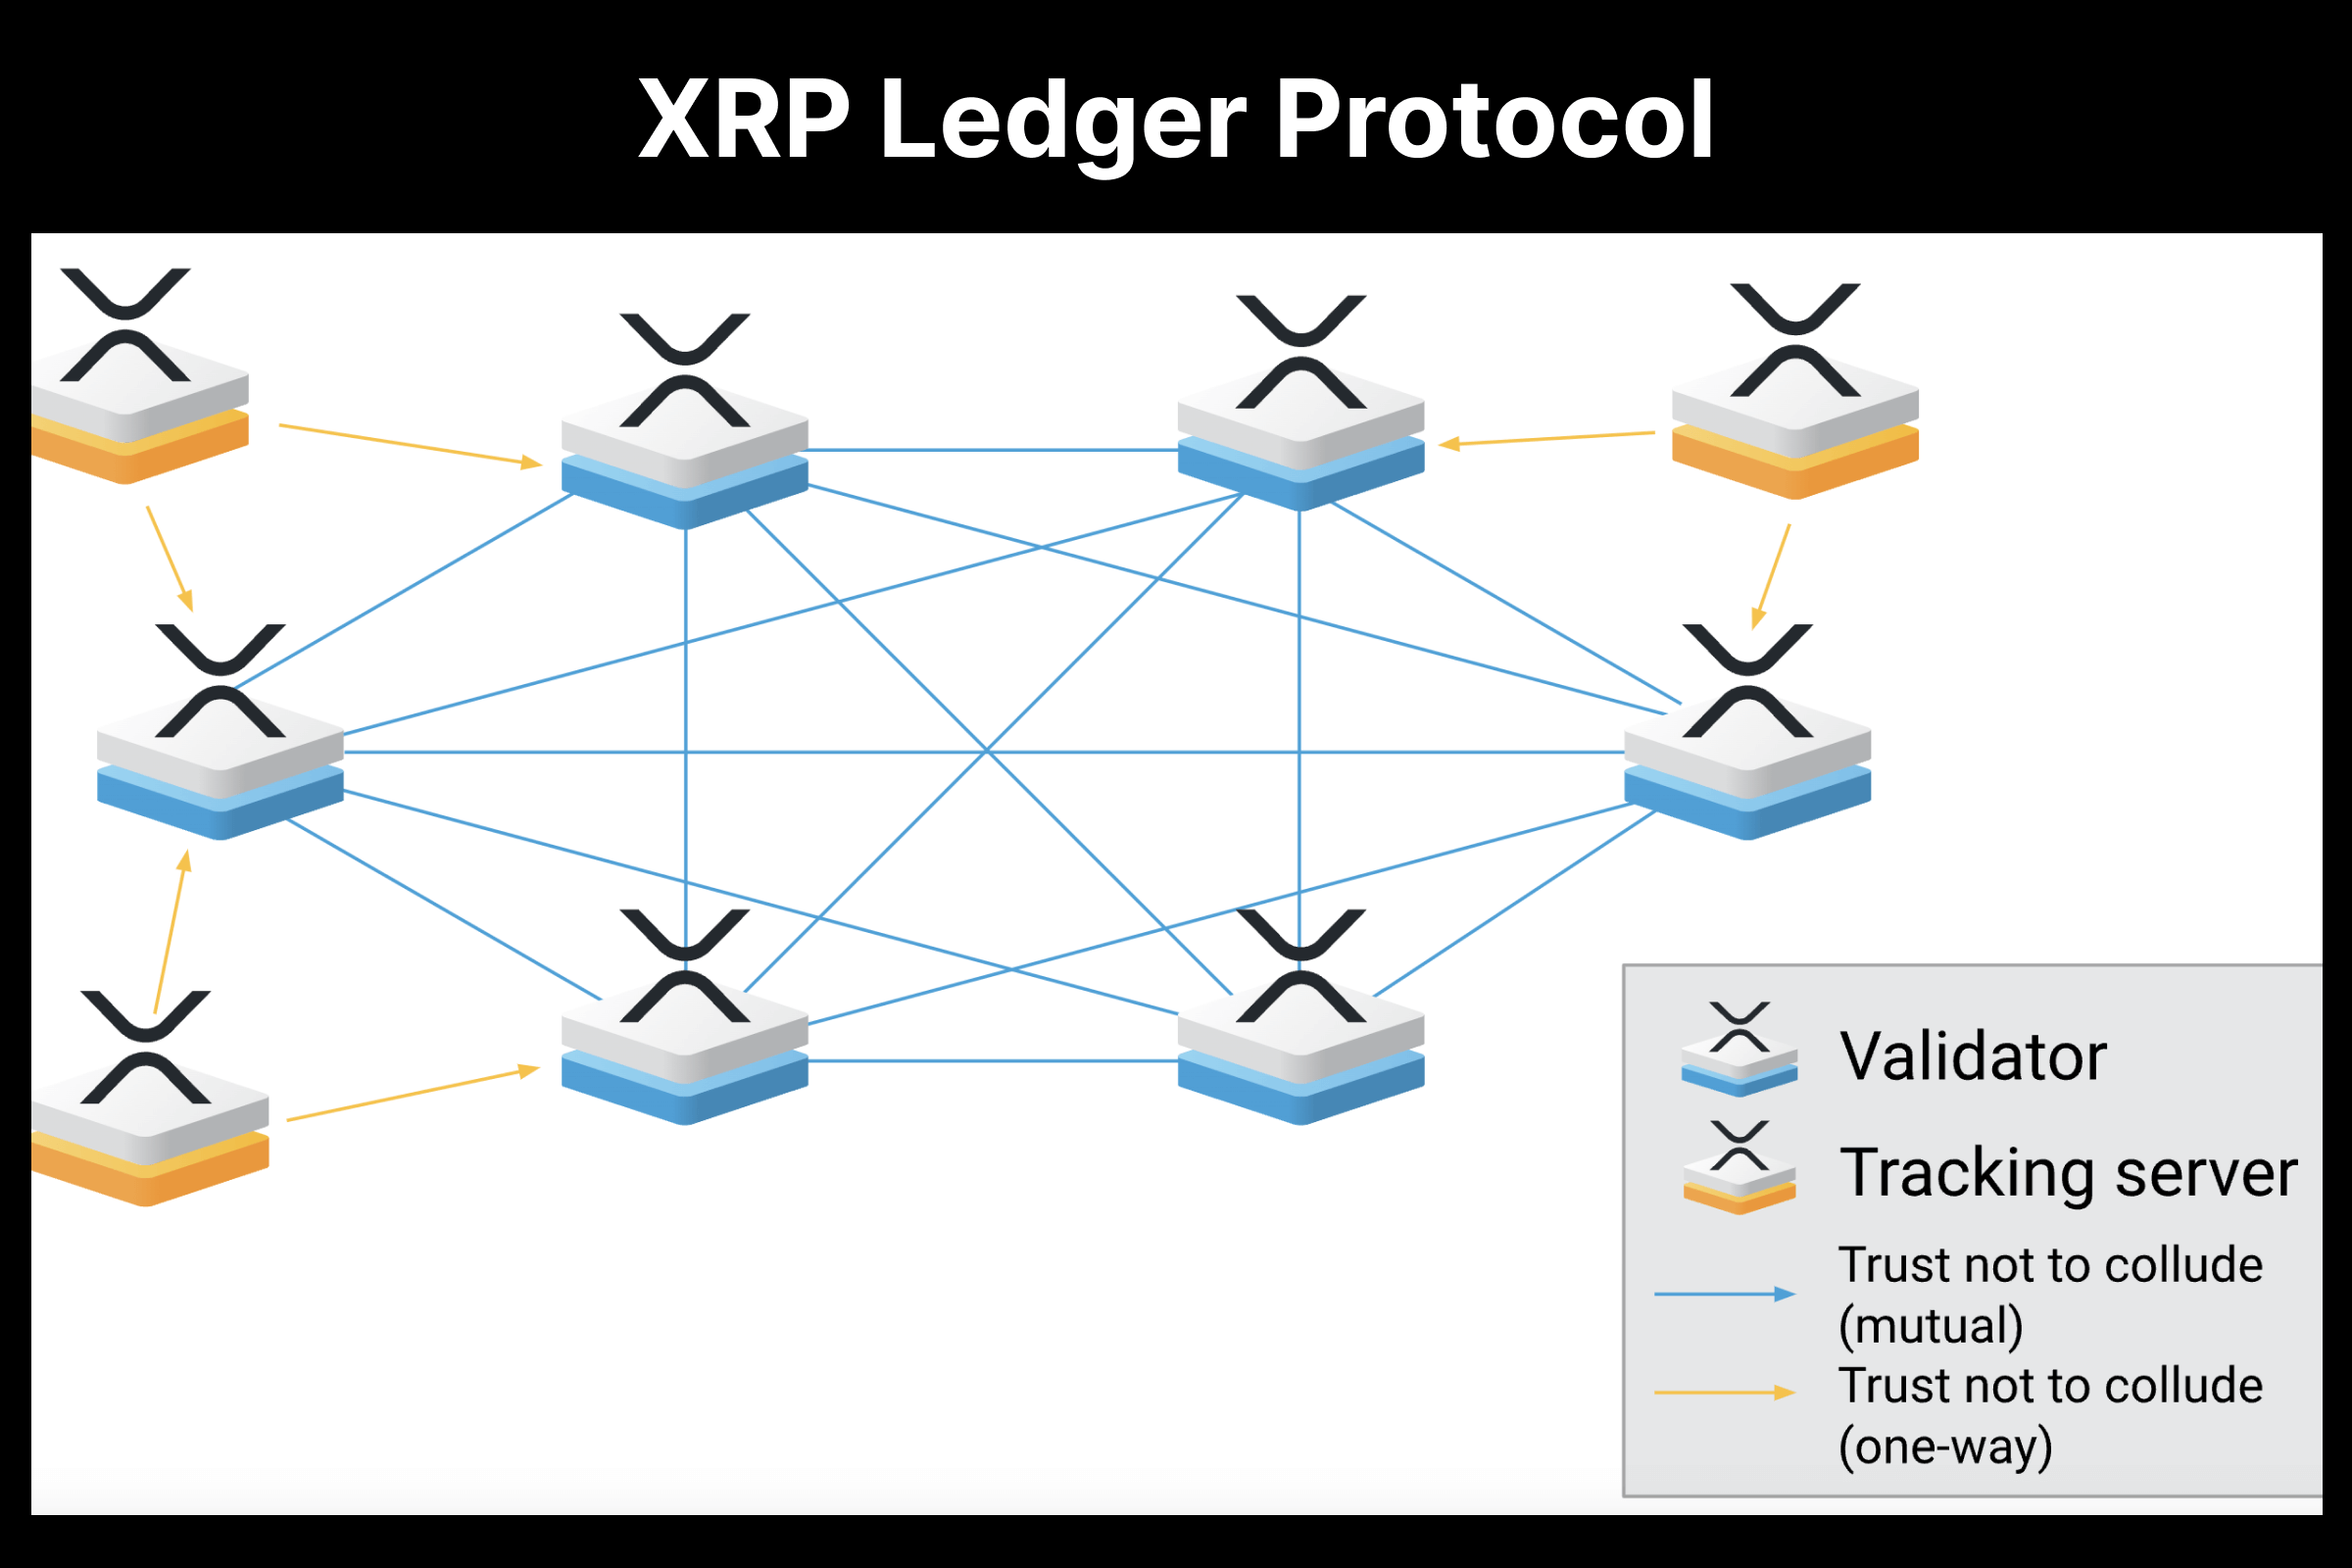 Participants in the XRP Ledger Protocol.